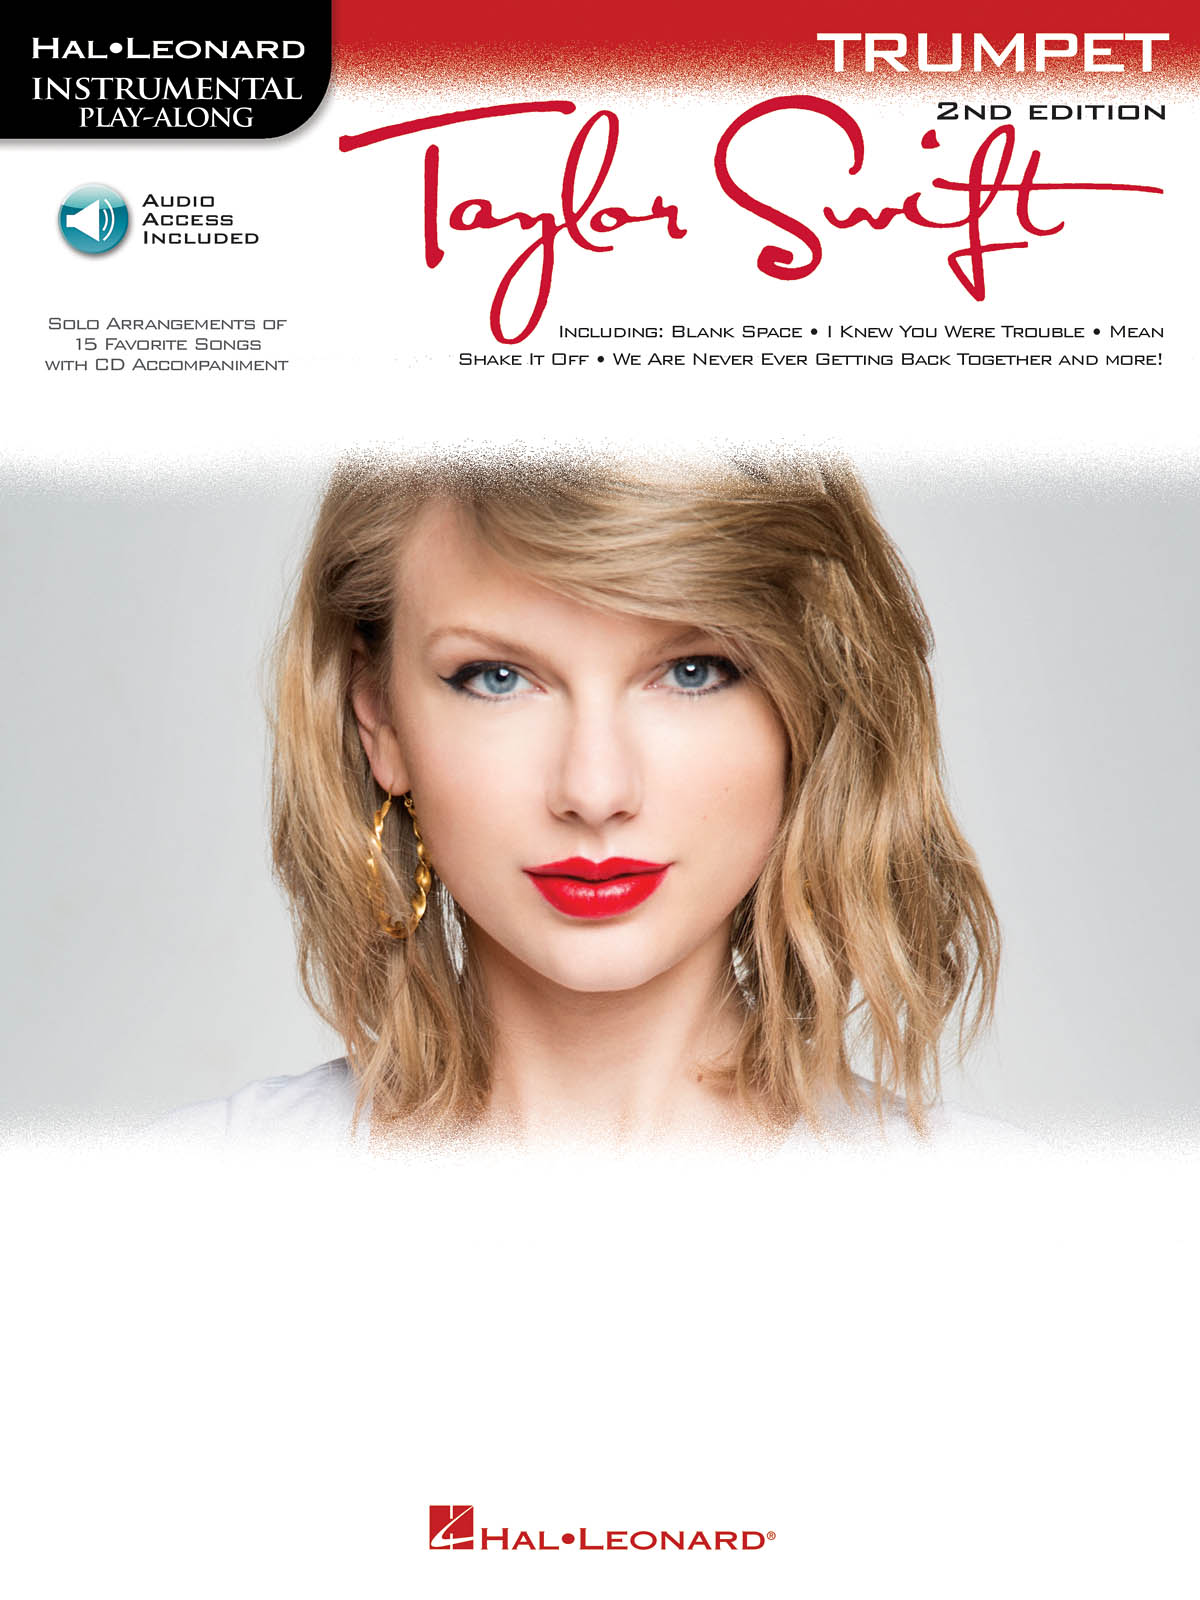 Instrumental Play-Along for Trumpet Taylor Swift